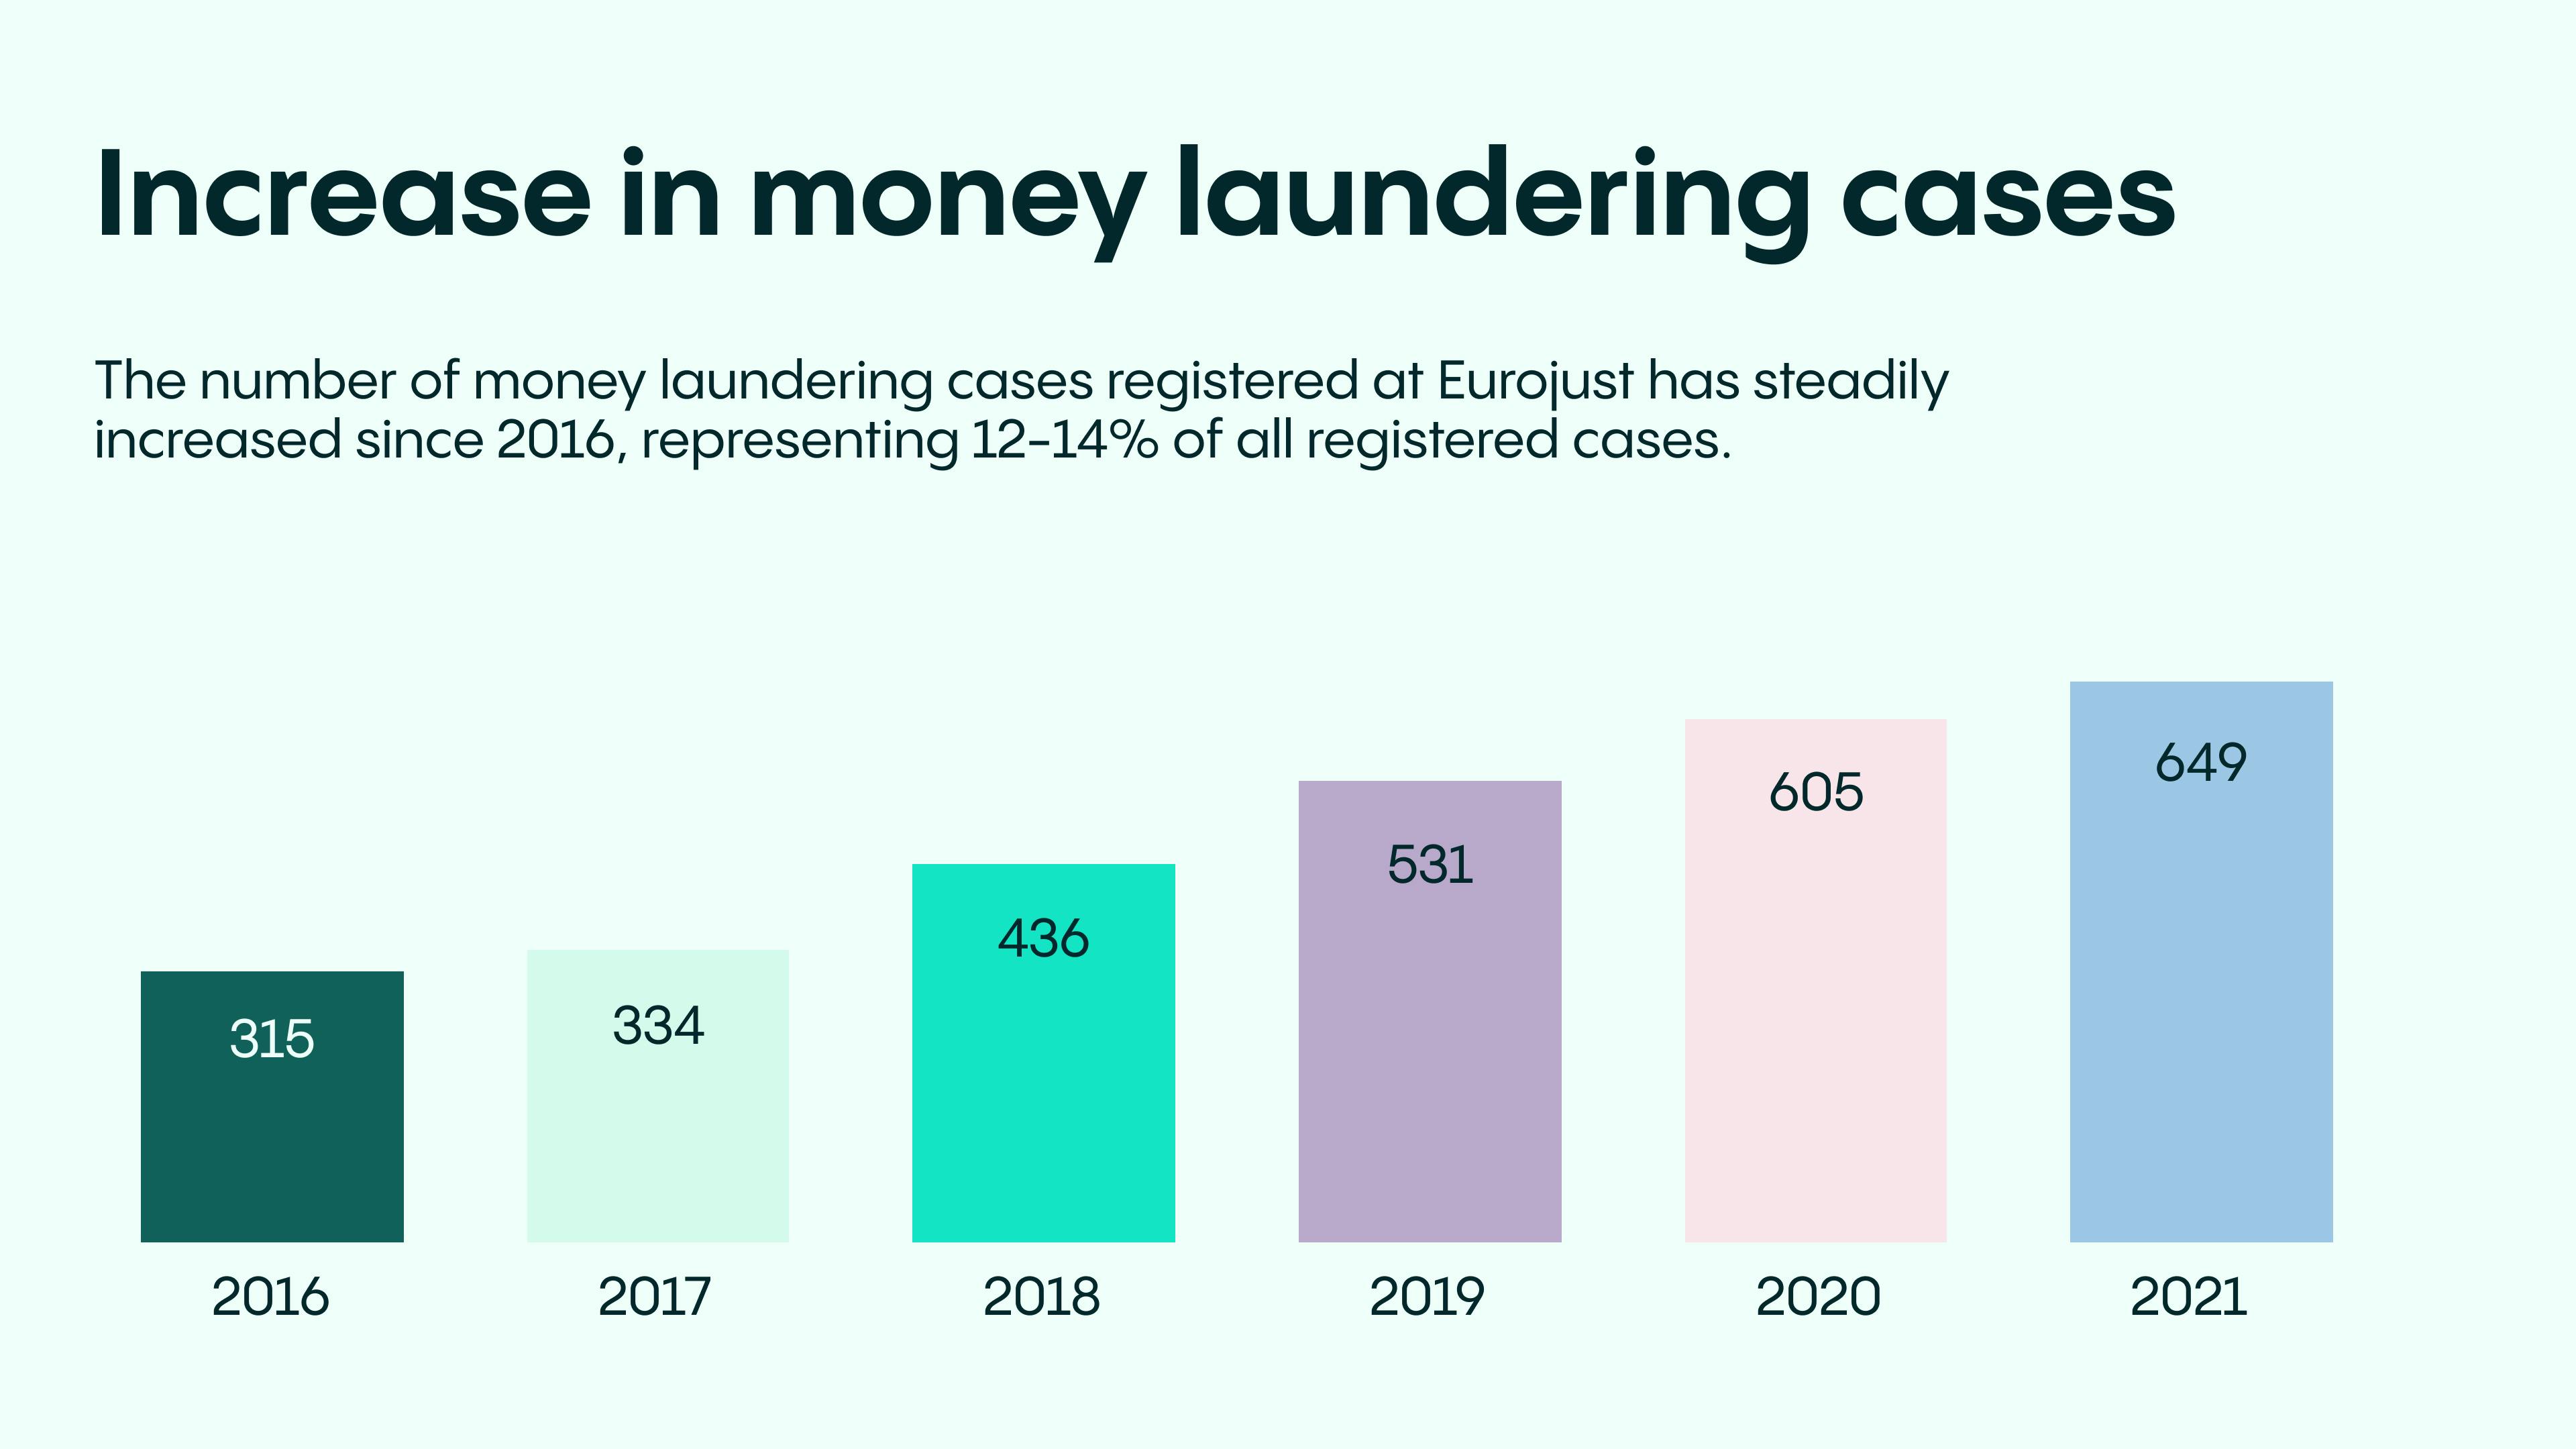 Annual increase in money laundering cases reported by Eurojust